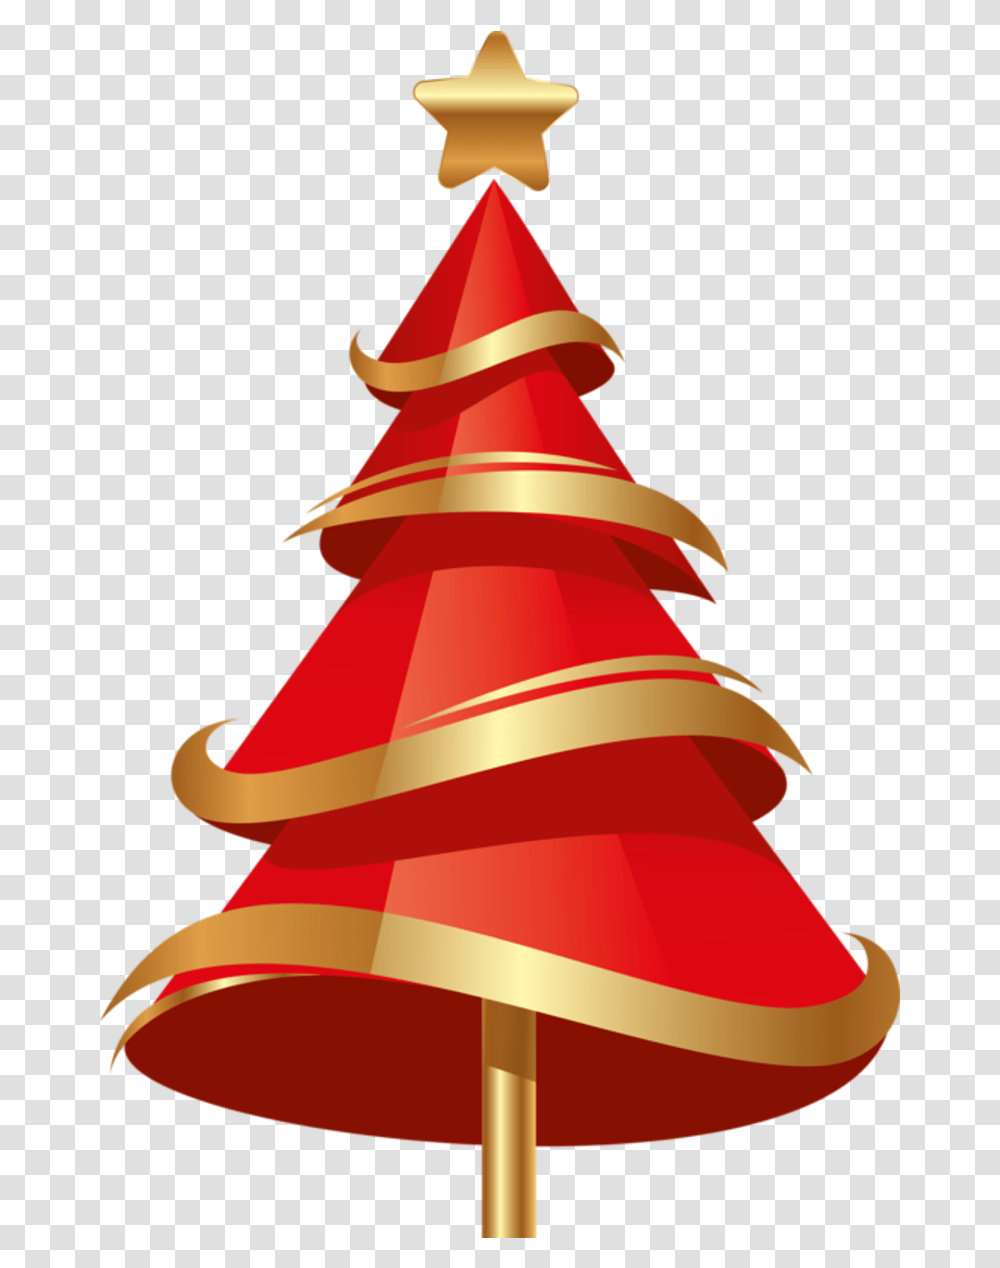 Merry Christmas Images Clipart Red Christmas Tree, Clothing, Apparel, Hat, Party Hat Transparent Png